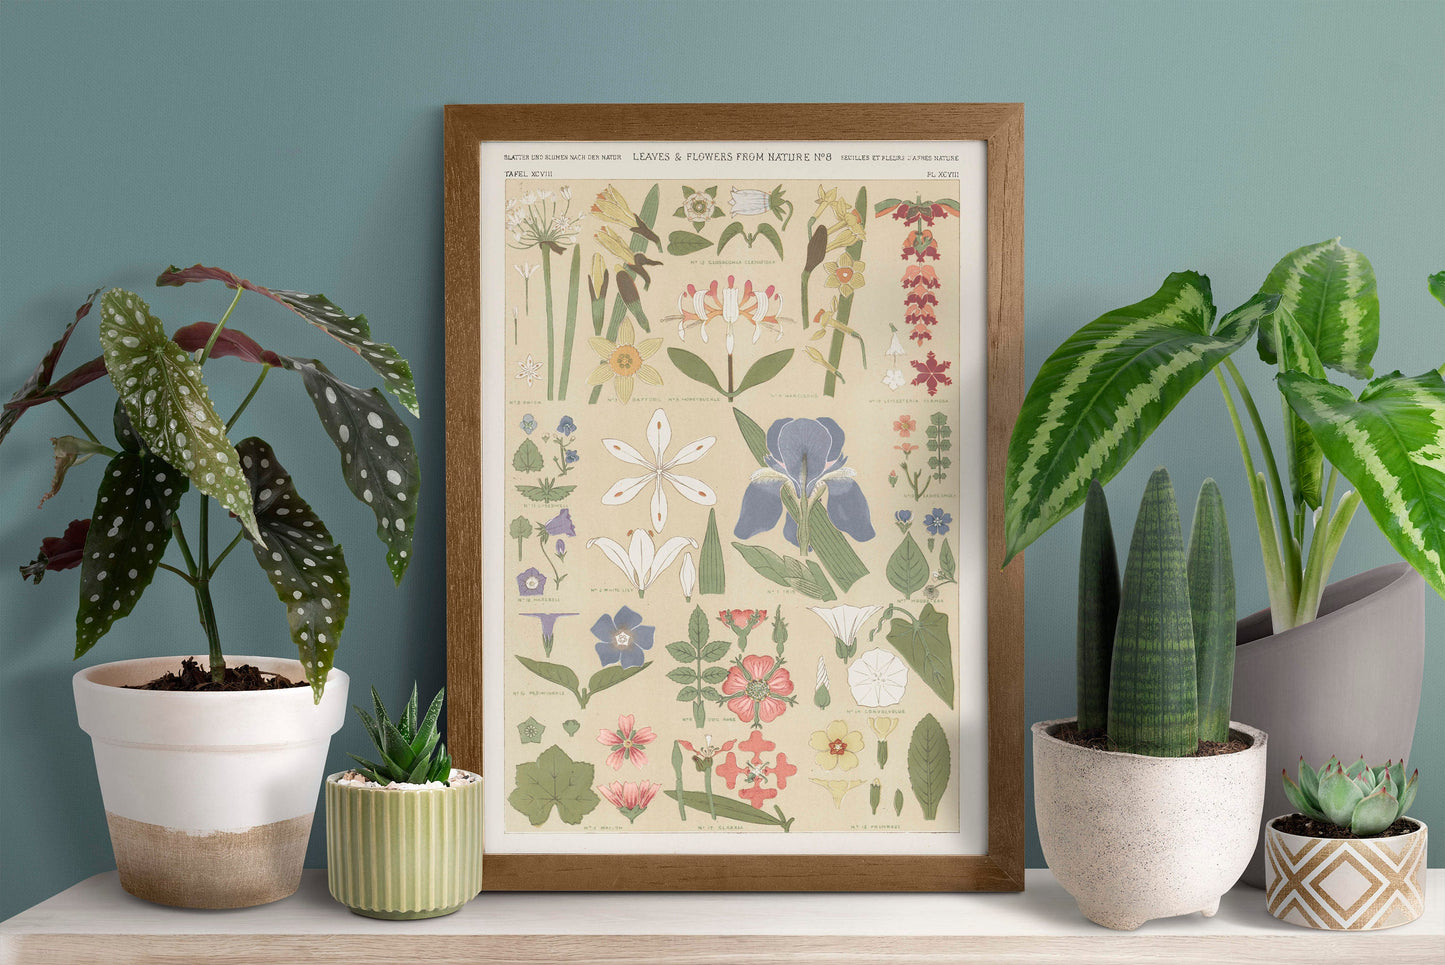 Leaves and Flowers Illustration  Print Poster Wall Hanging Decor